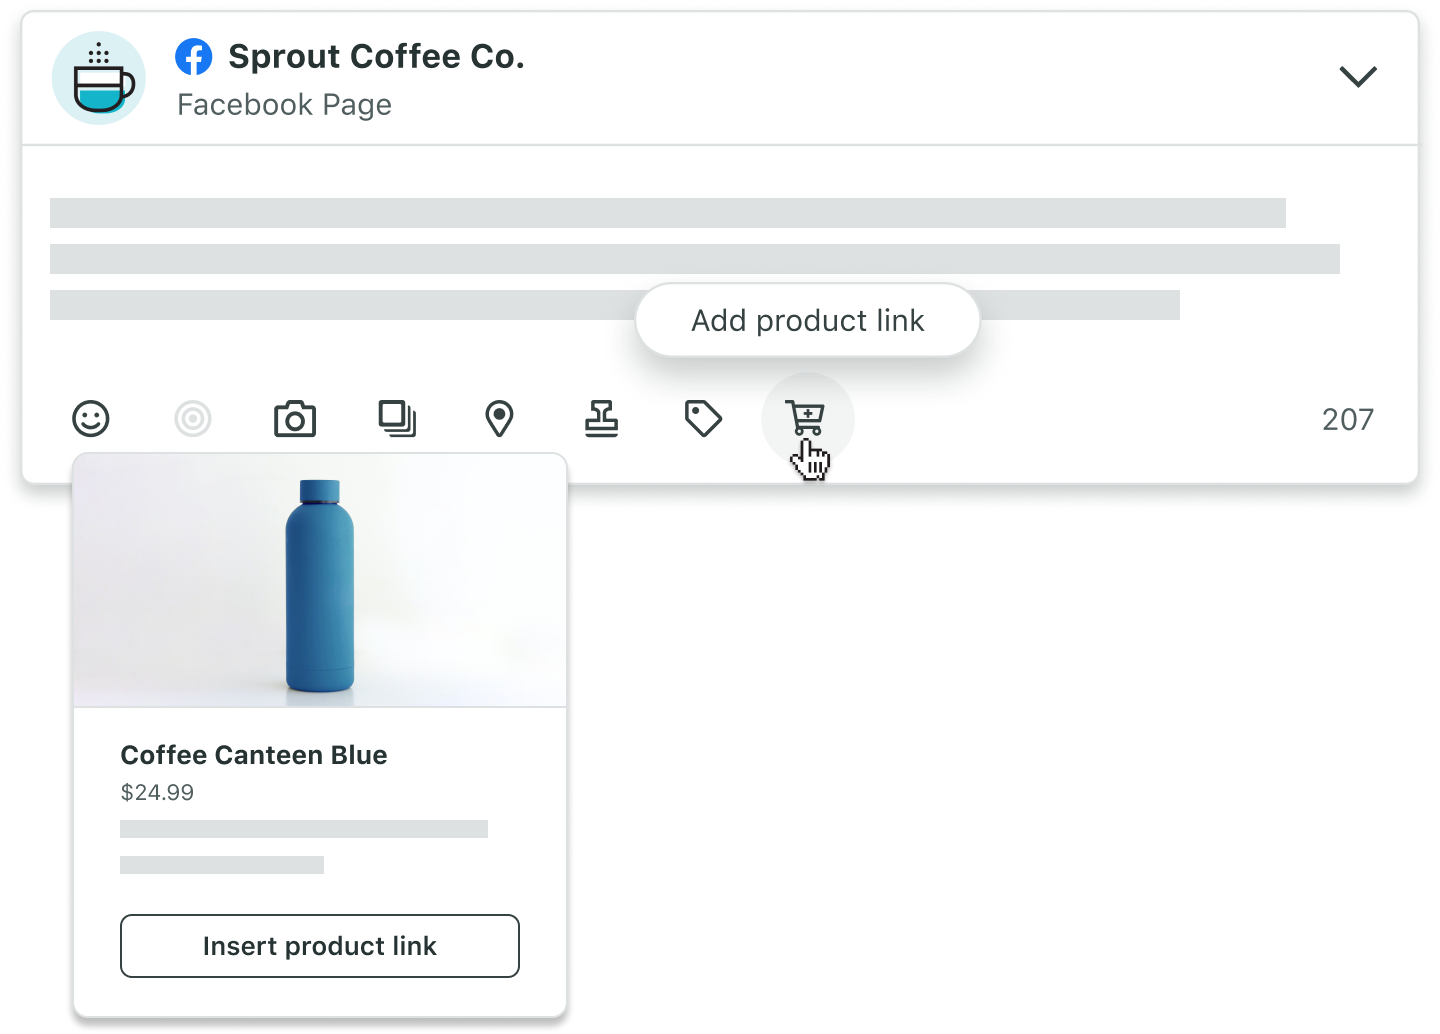 In the same way you can add an emoji, photo or location to a new Facebook post, you can also include a product link from within Compose.